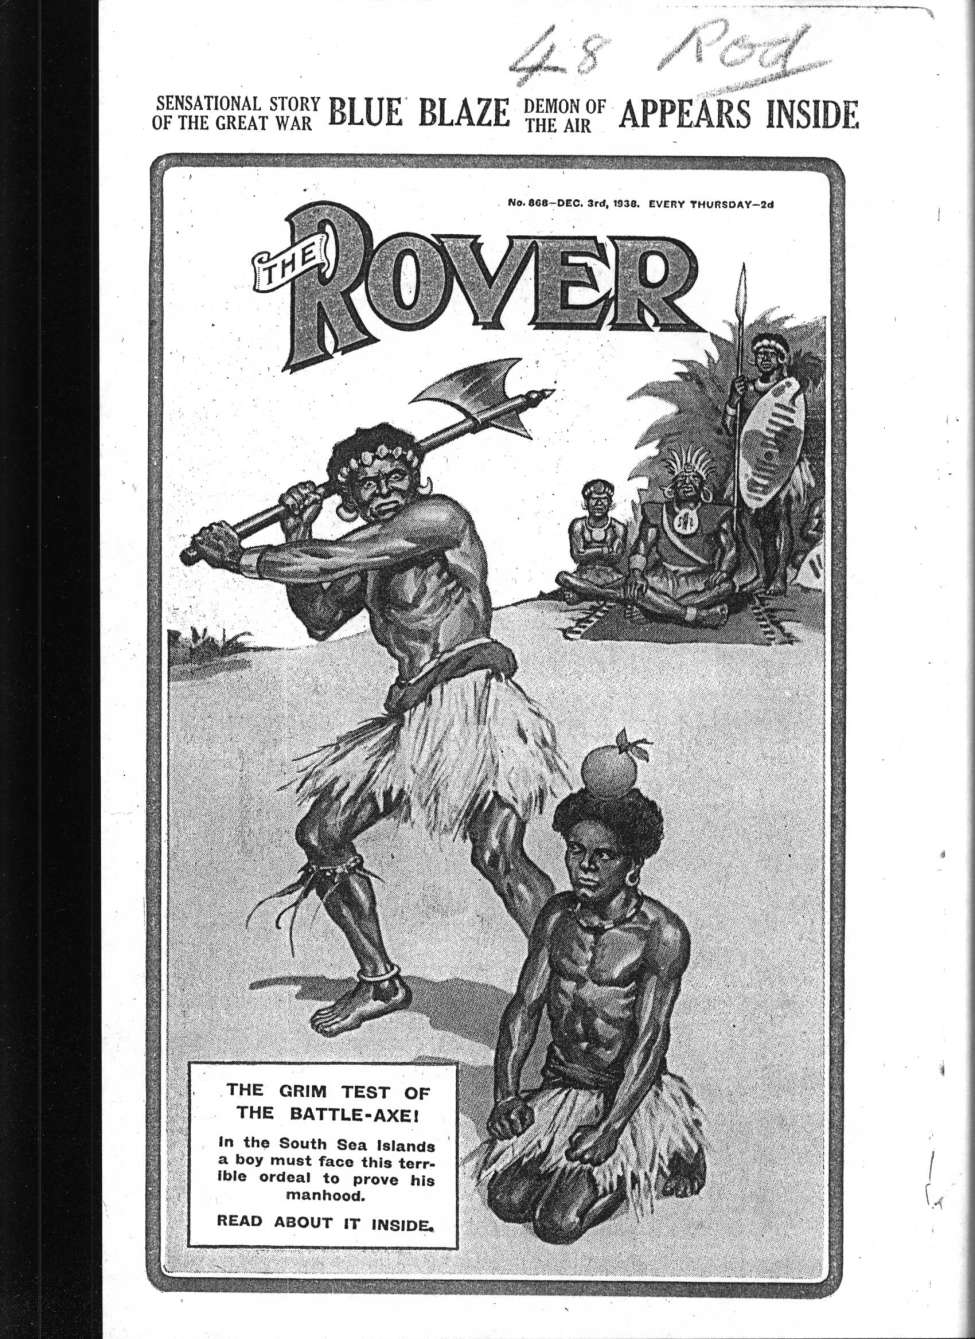 Book Cover For The Rover 868